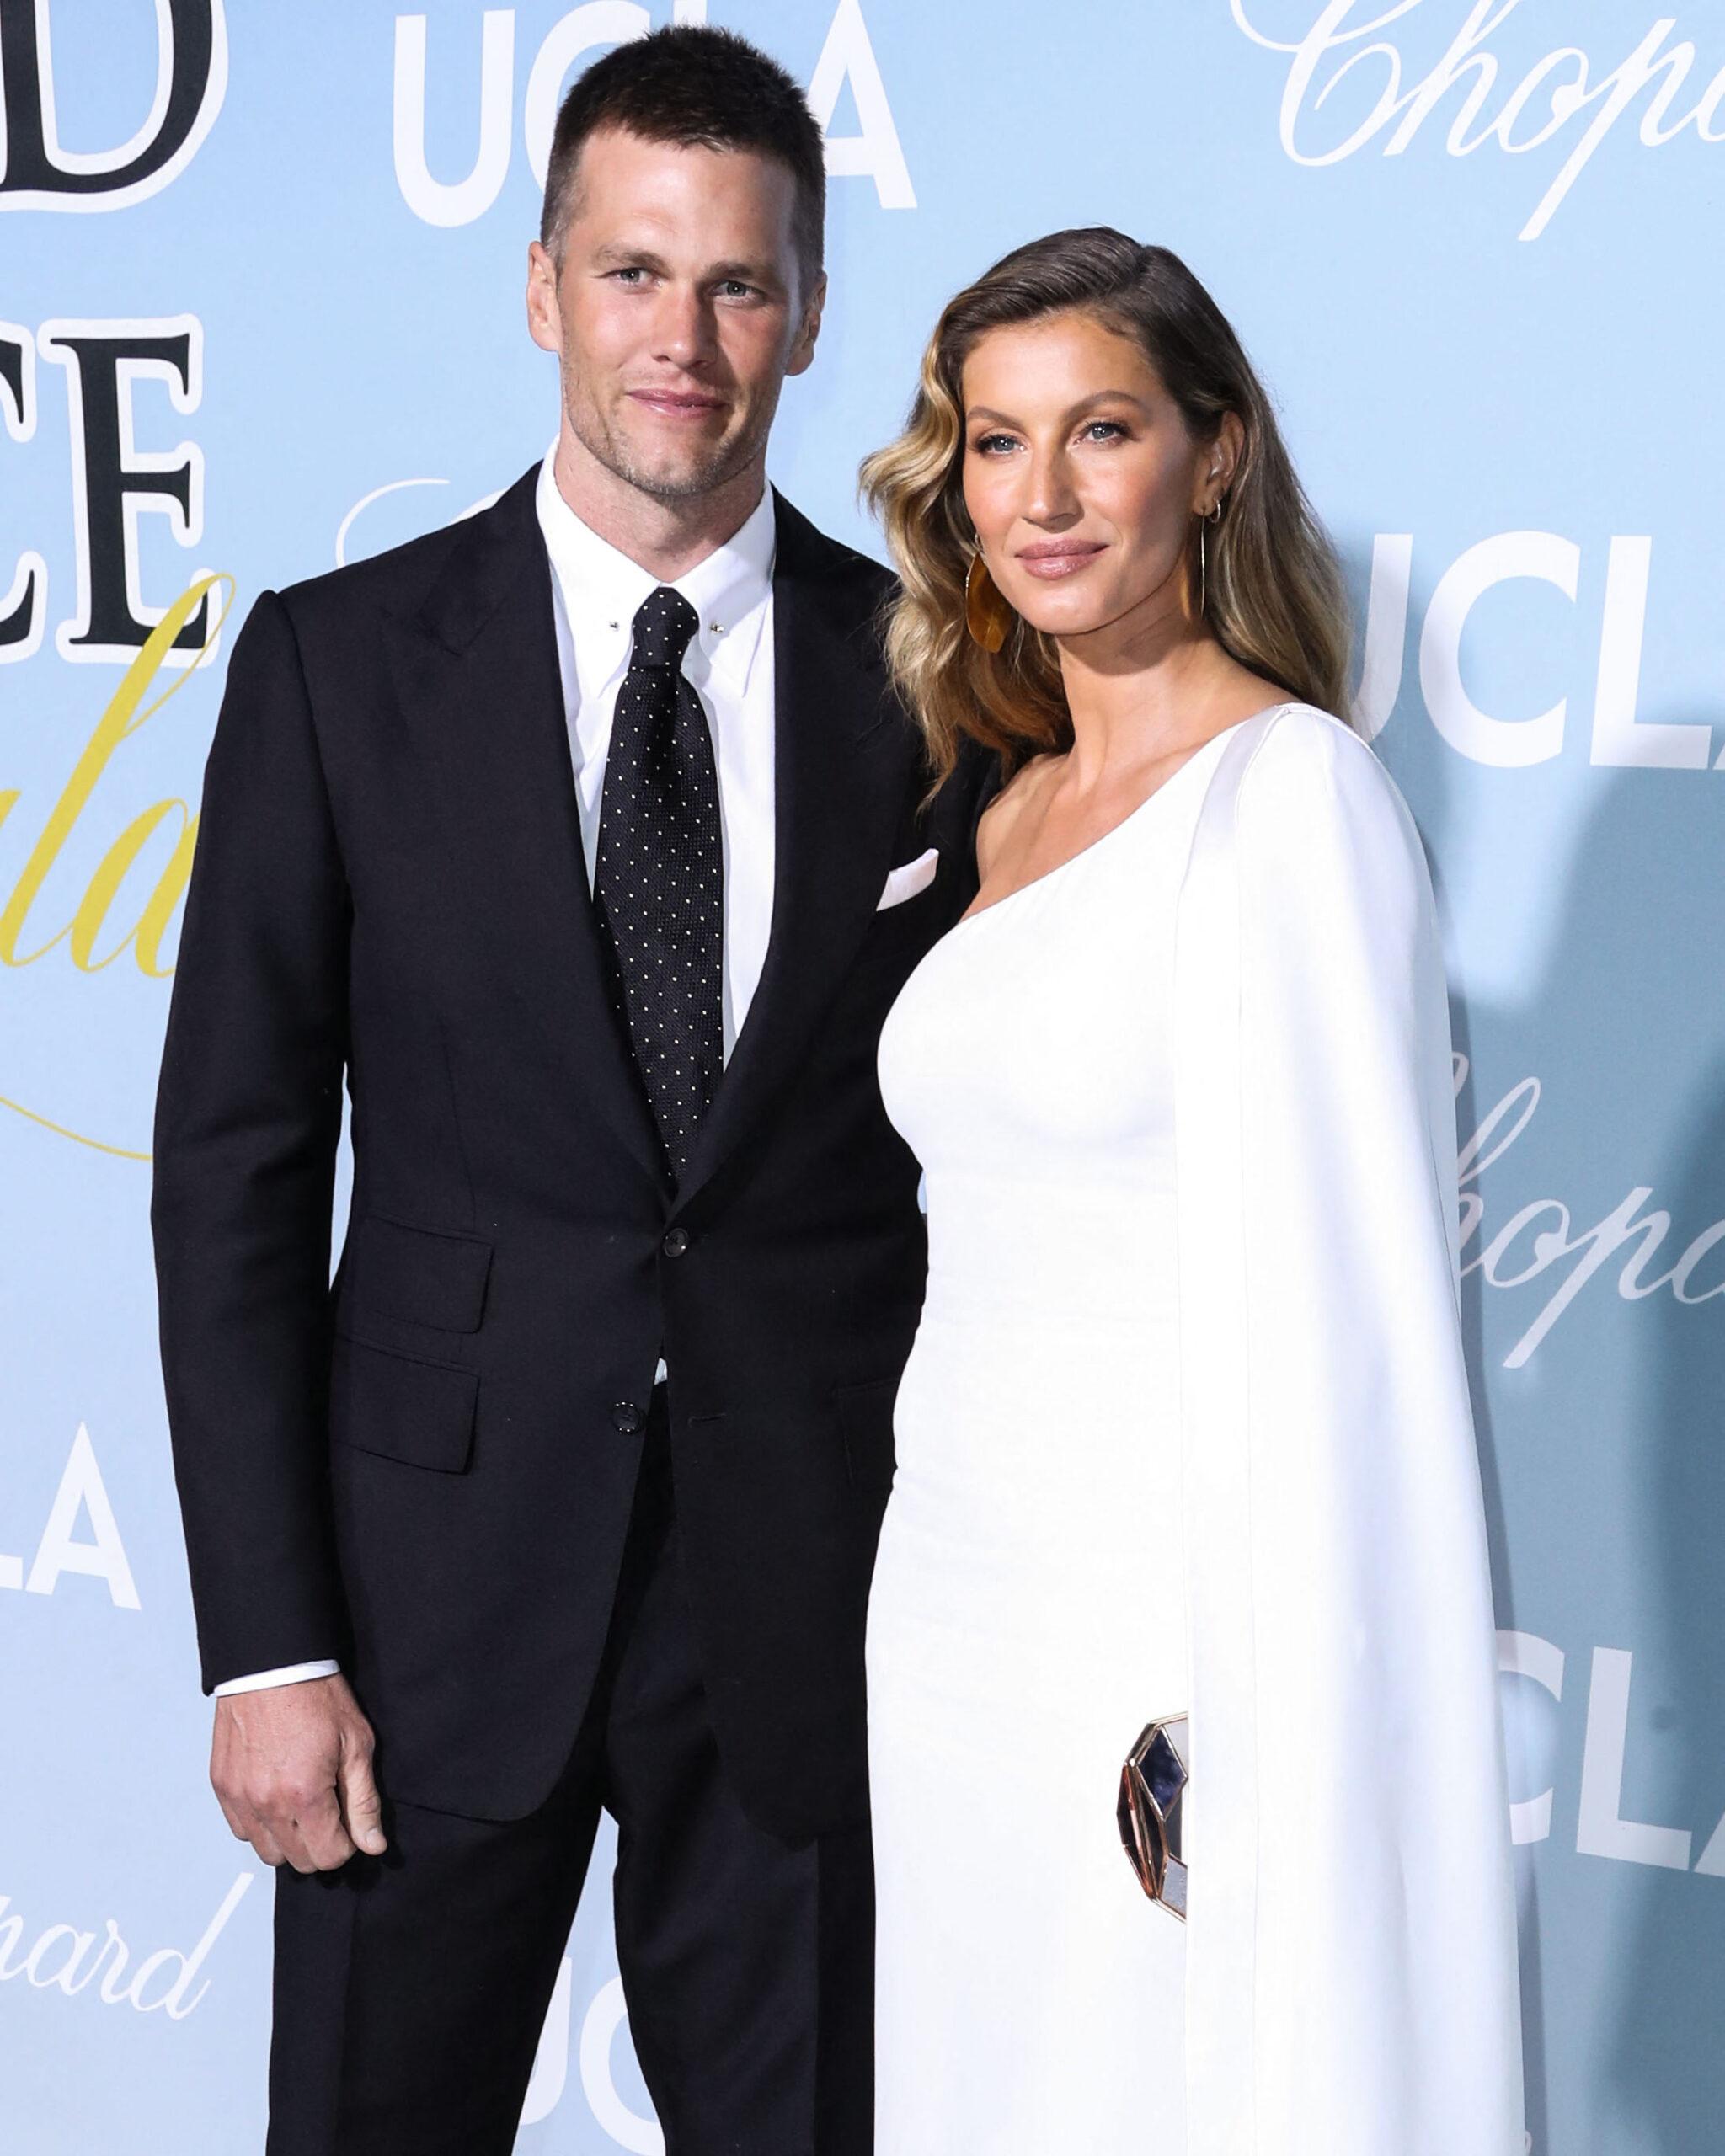 Gisele Bündchen and Tom Brady at 2019 Hollywood For Science Gala